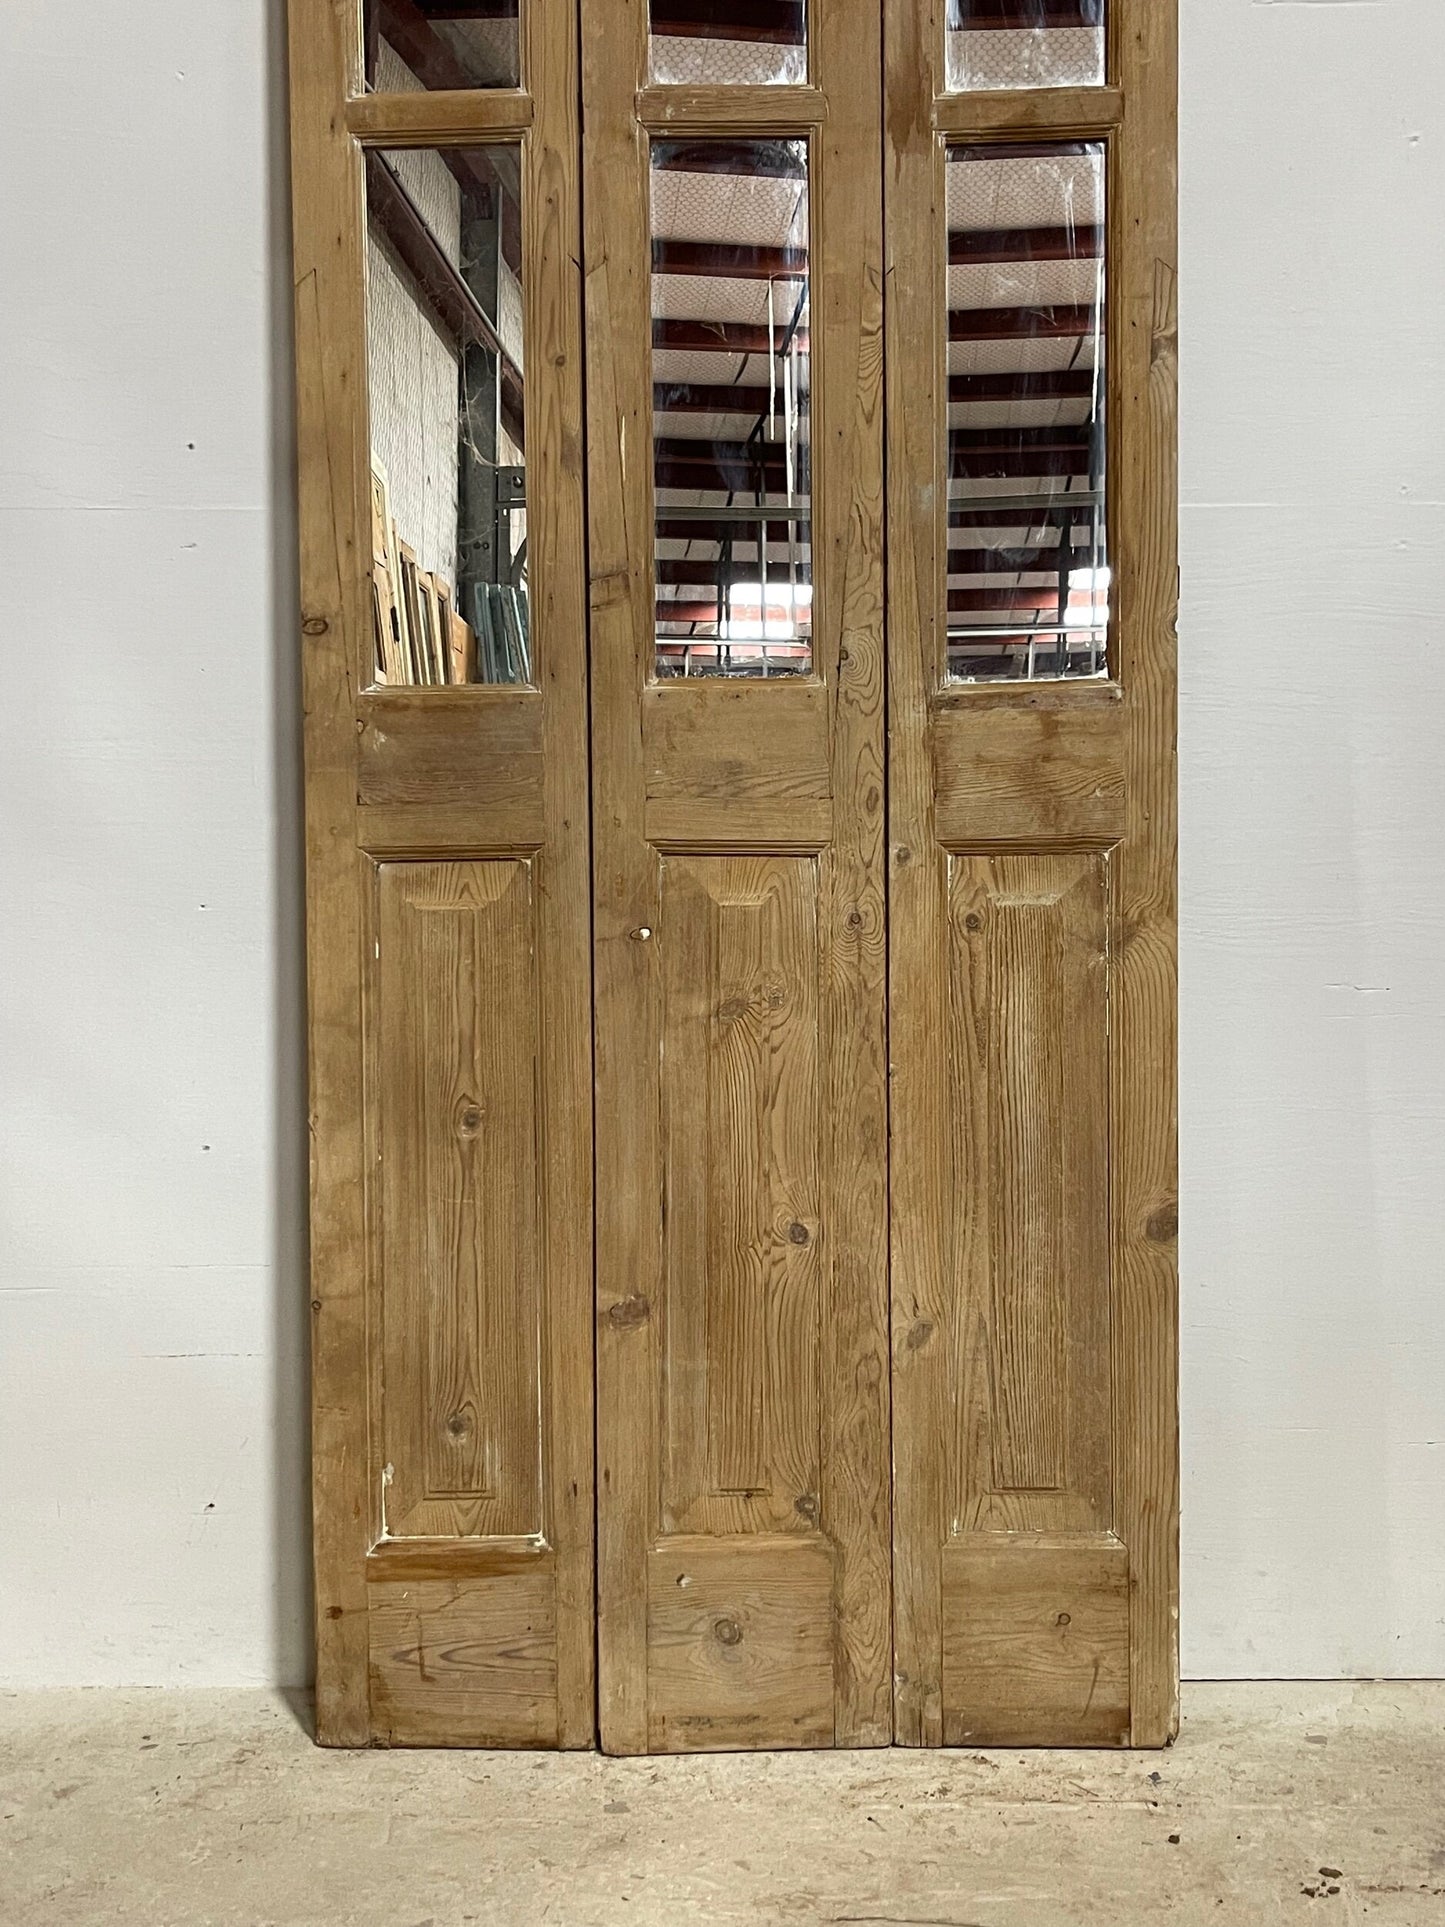 Antique French doors with mirror (106.5x33.5) H0256s